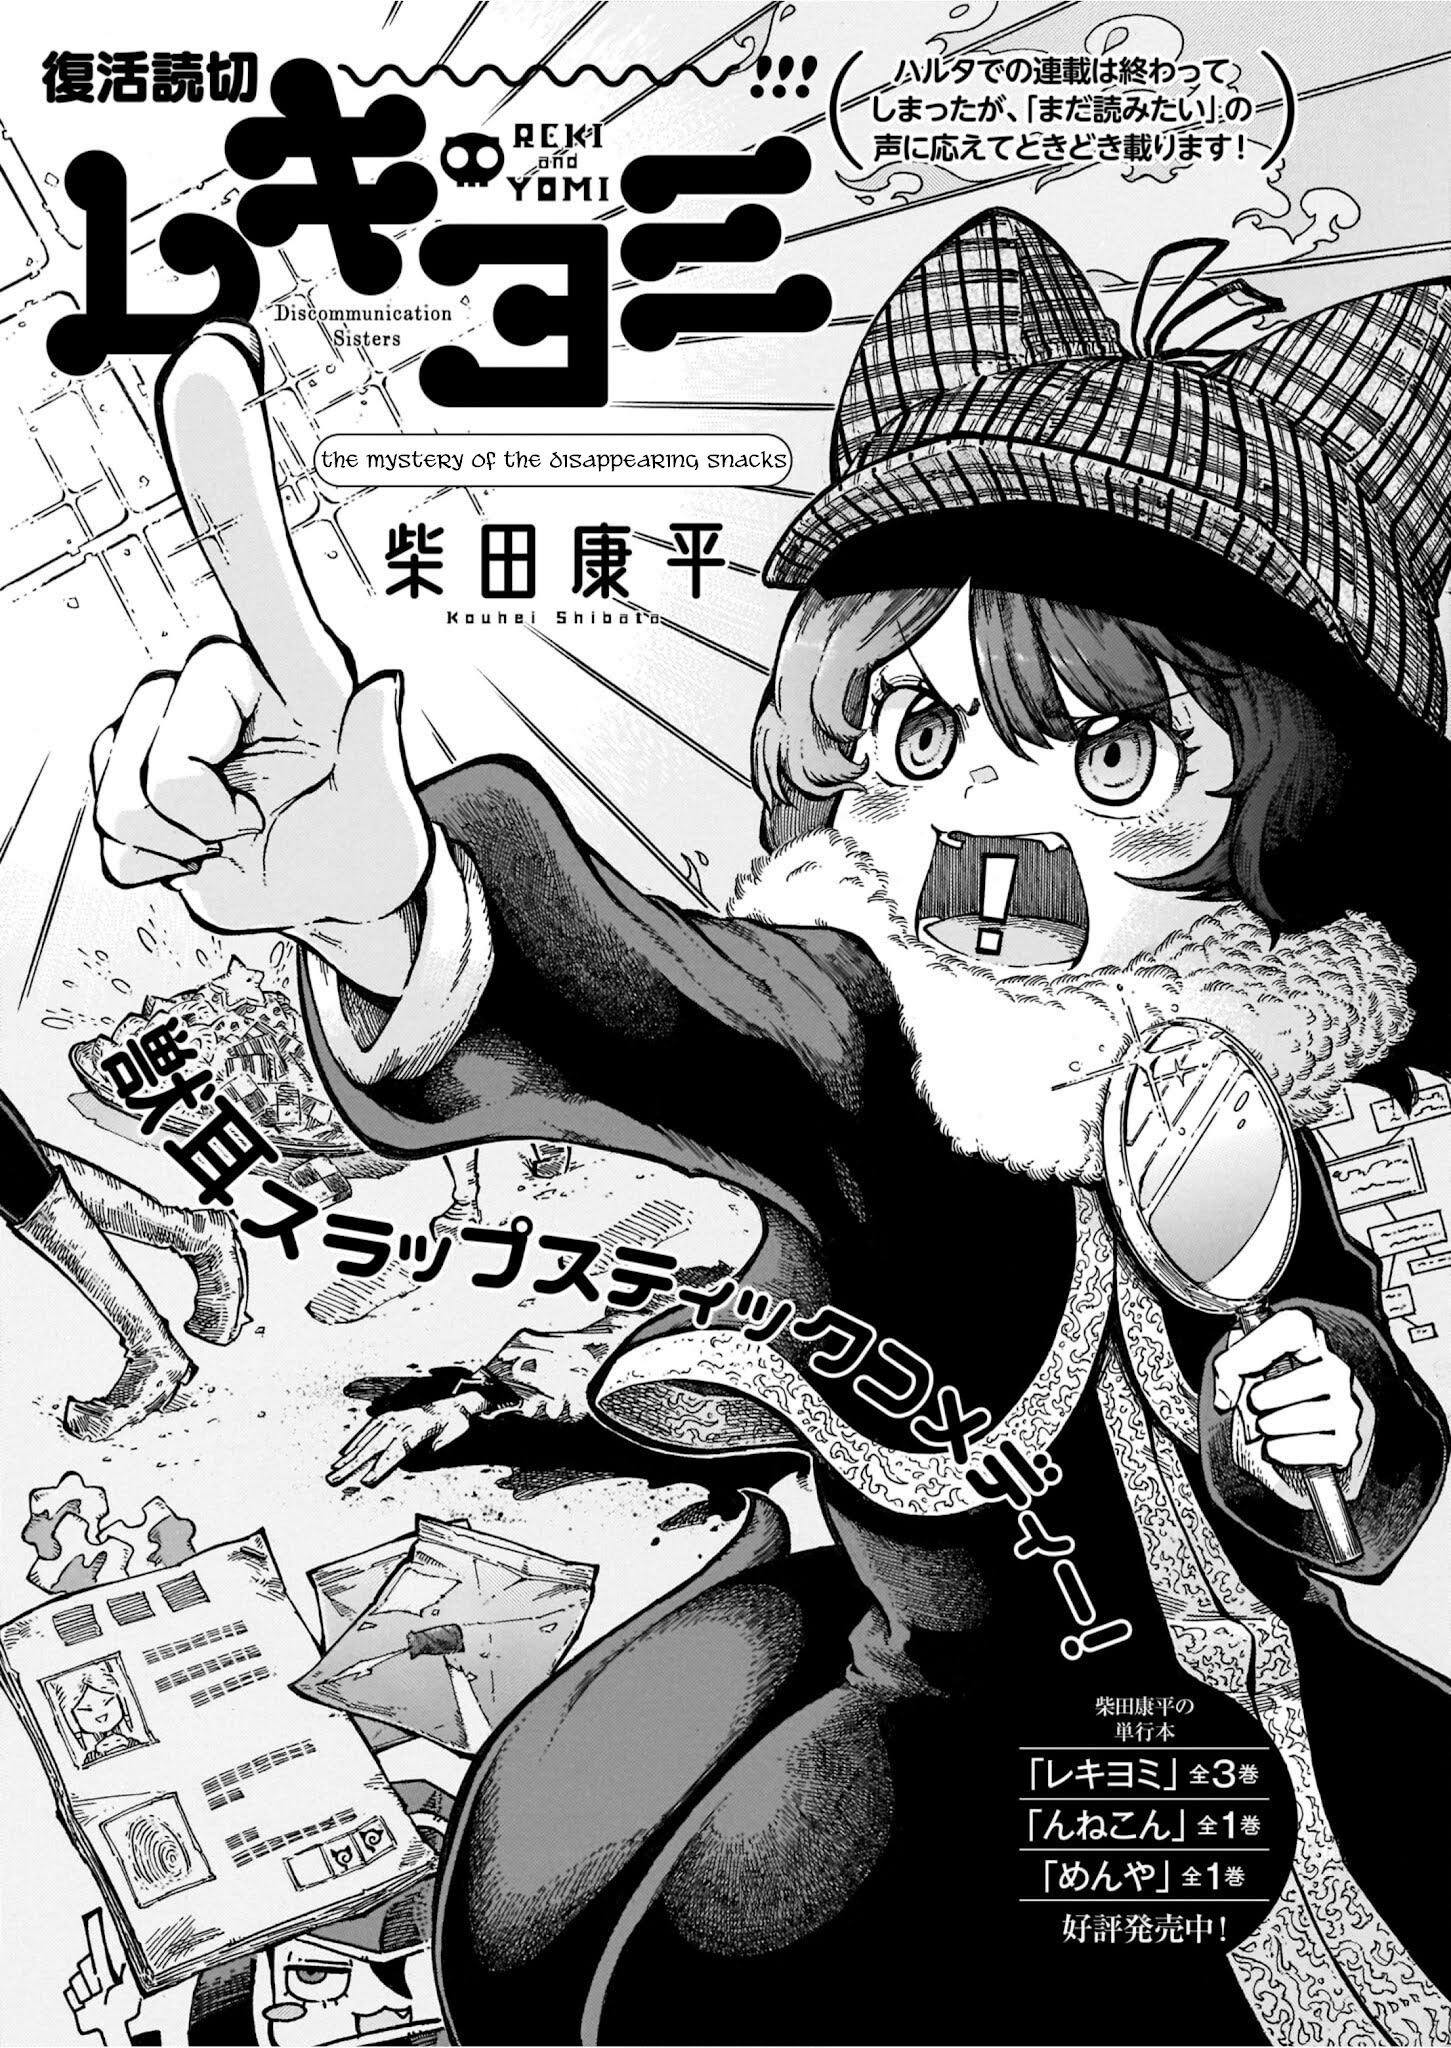 Reki Yomi Chapter 26.5: The Mystery Of The Disappearing Snacks & Poliko's Class - Picture 1